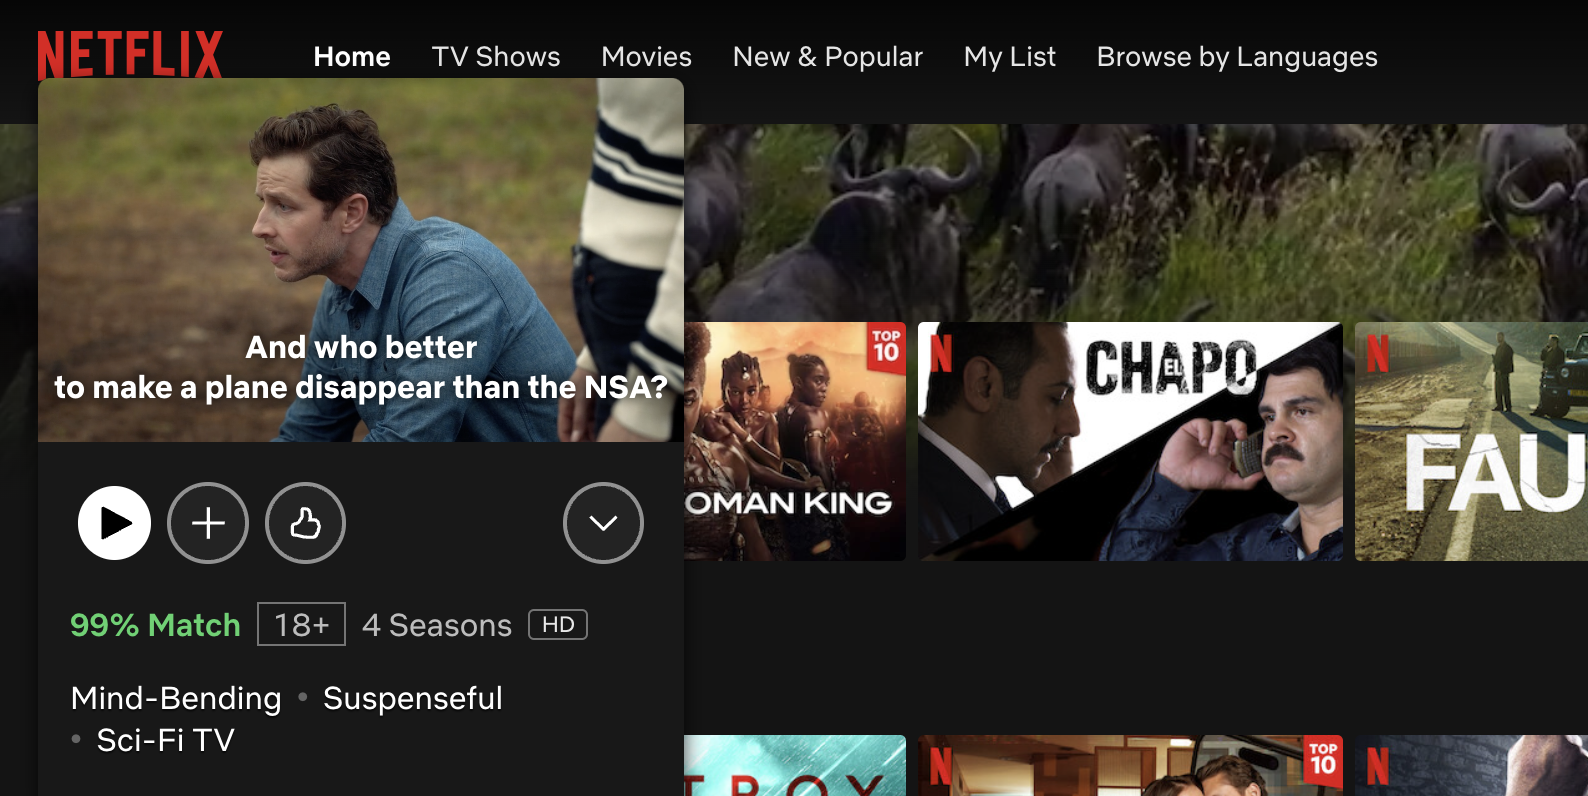 personalized marketing examples, Netflix app showing 99% match